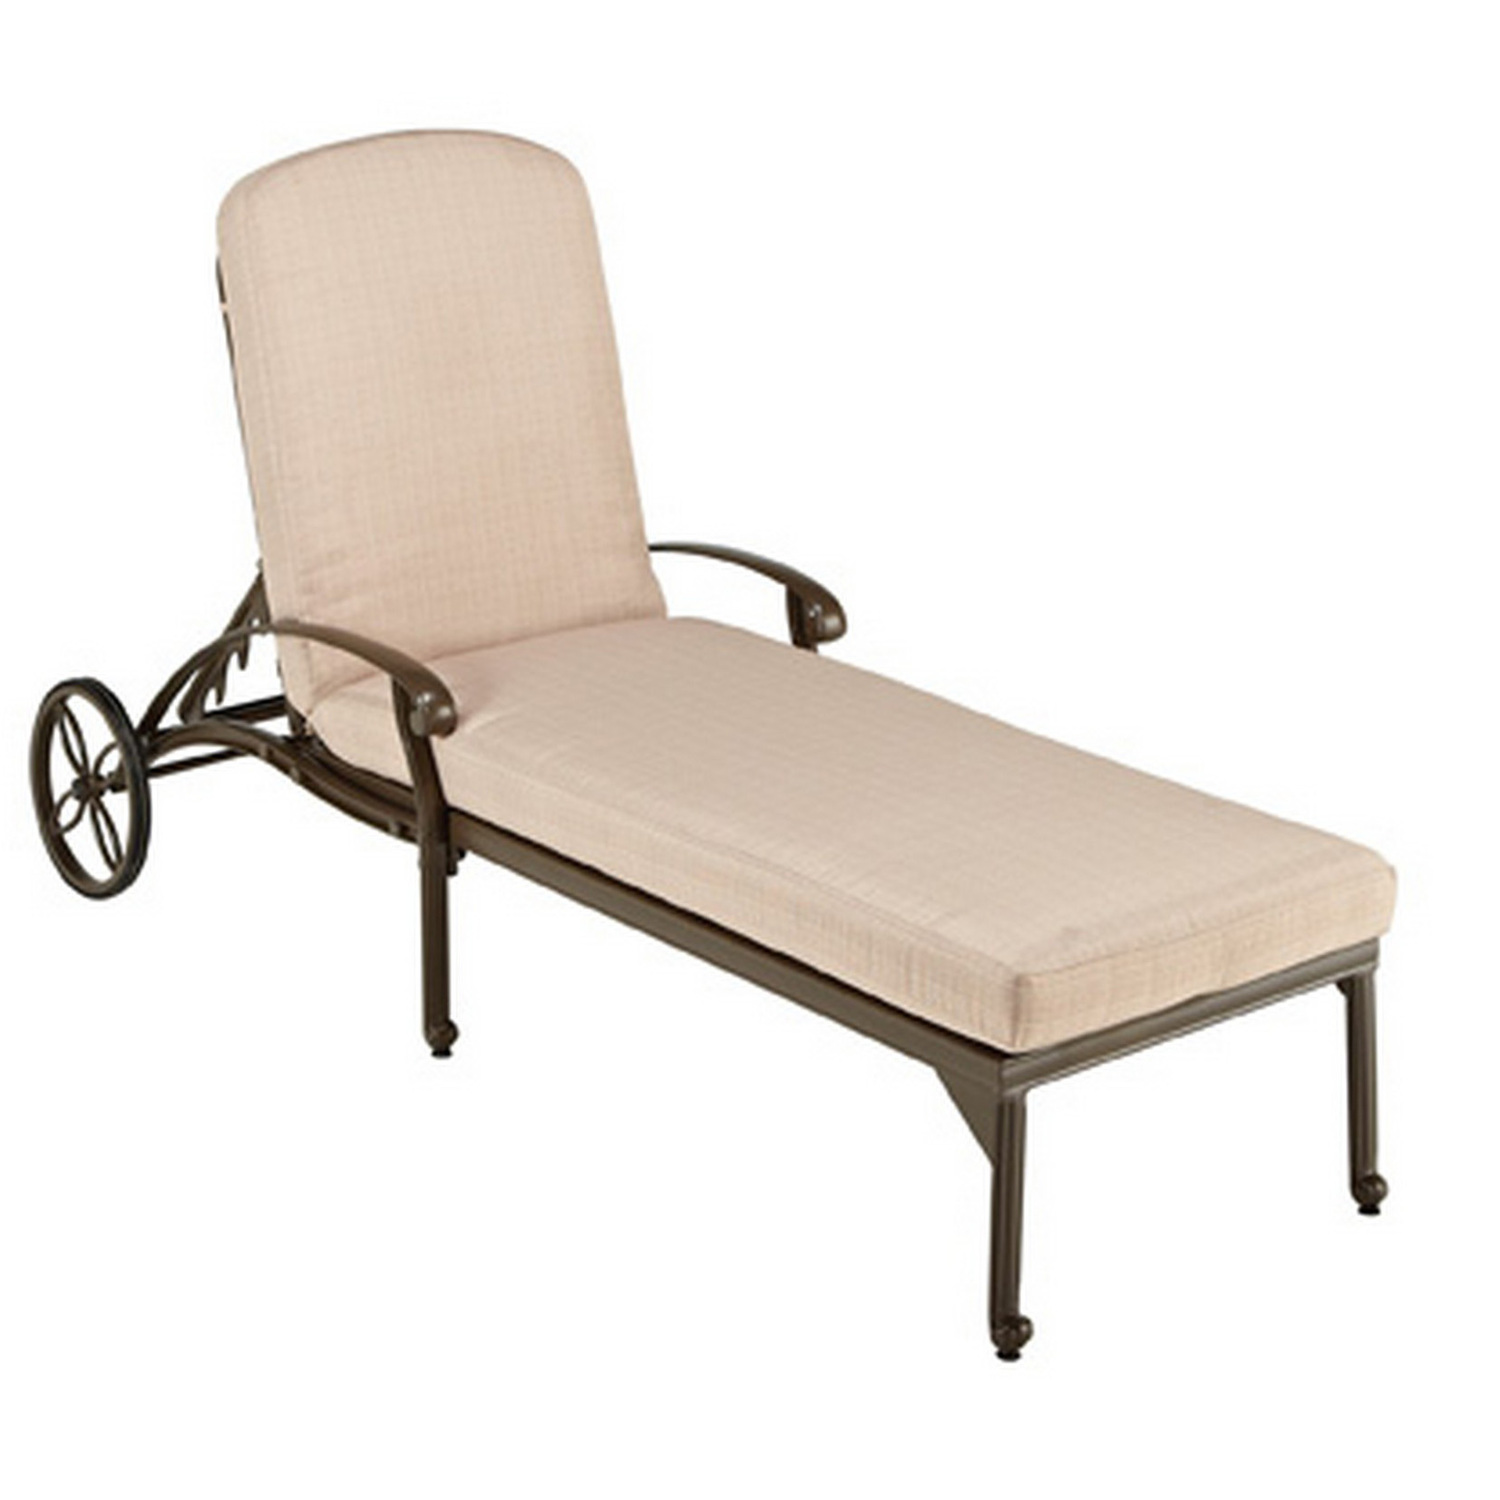 Homestyles Capri Cast Aluminum Outdoor Patio Reclining Chaise Lounge in Taupe - image 1 of 2